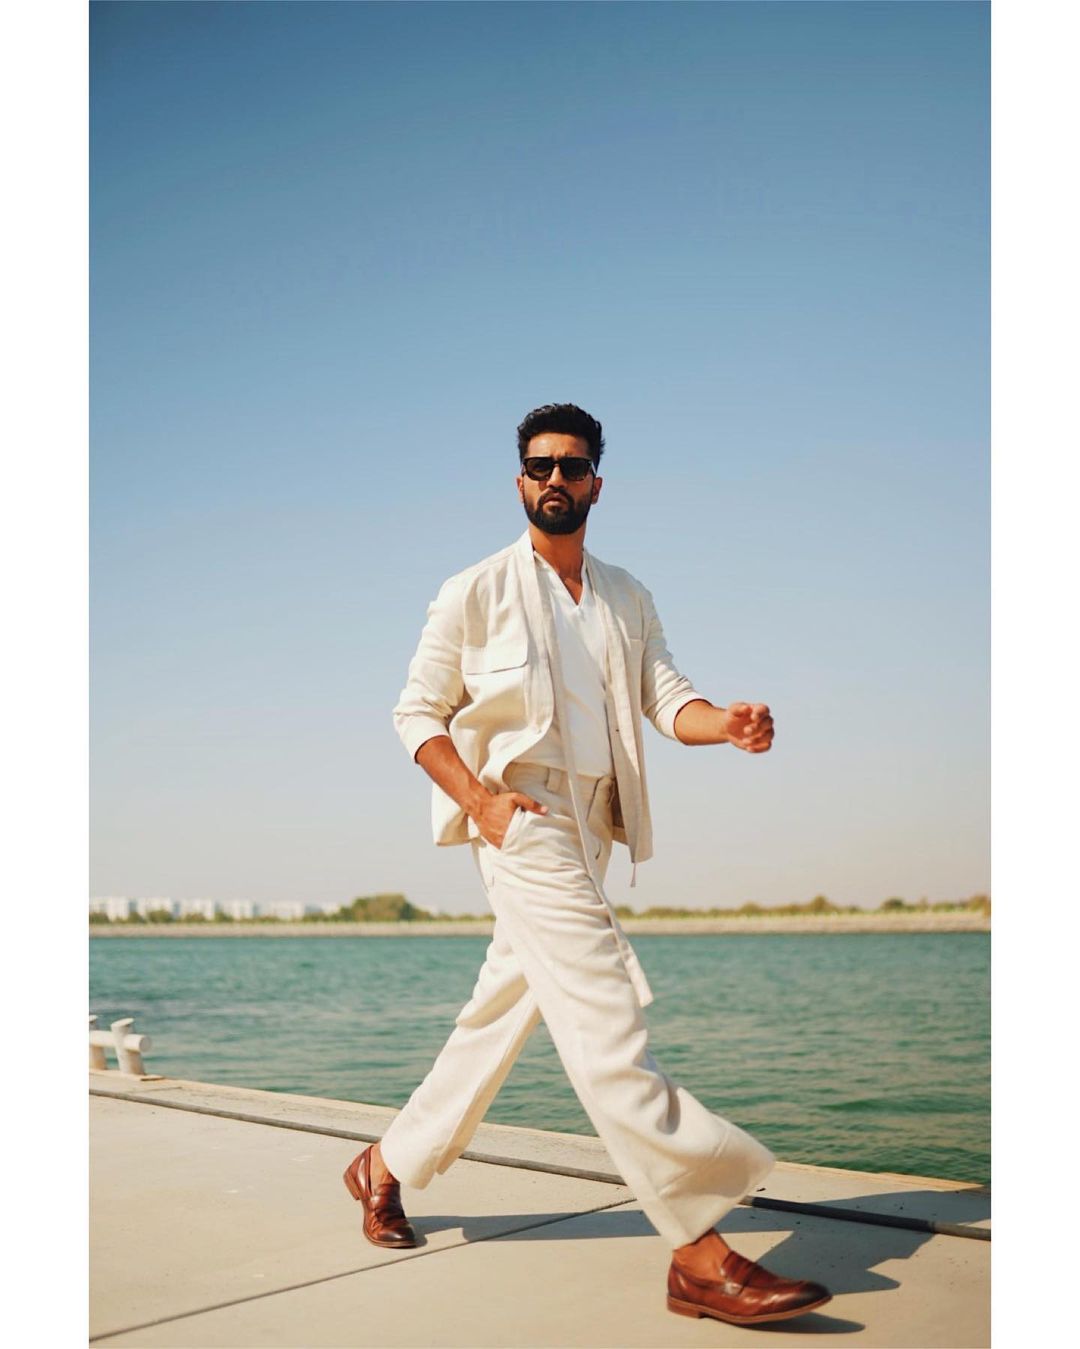 Vicky Kaushal looks dapper in the all smart and casual all-white outfit